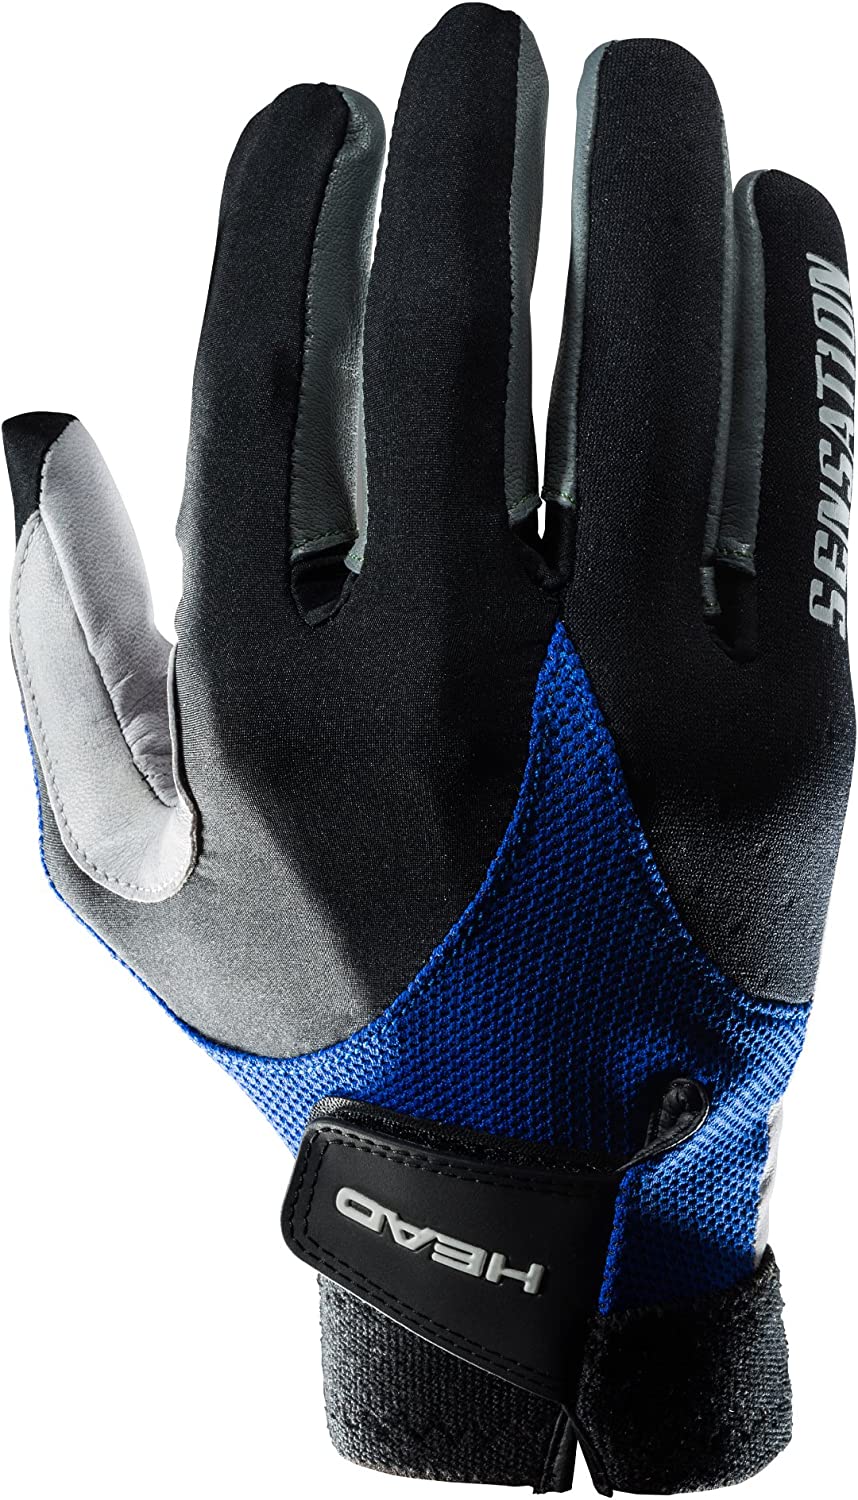 HEAD Leather Racquetball Glove reviews